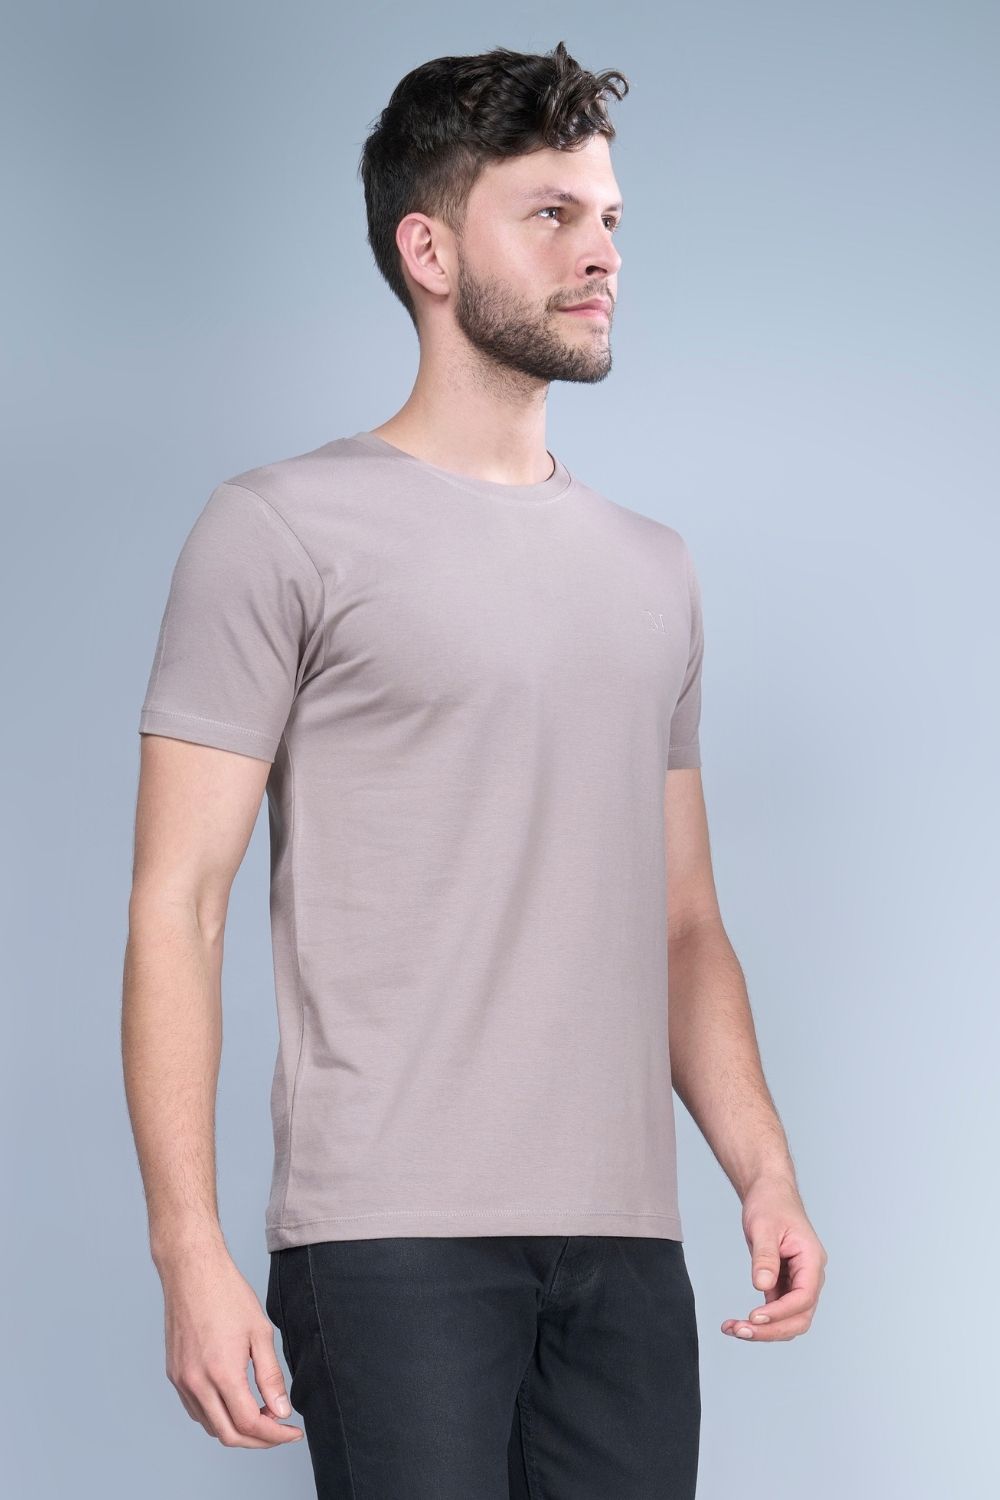 Coin grey colored, solid t shirt for men with round neck and half sleeves, side view.